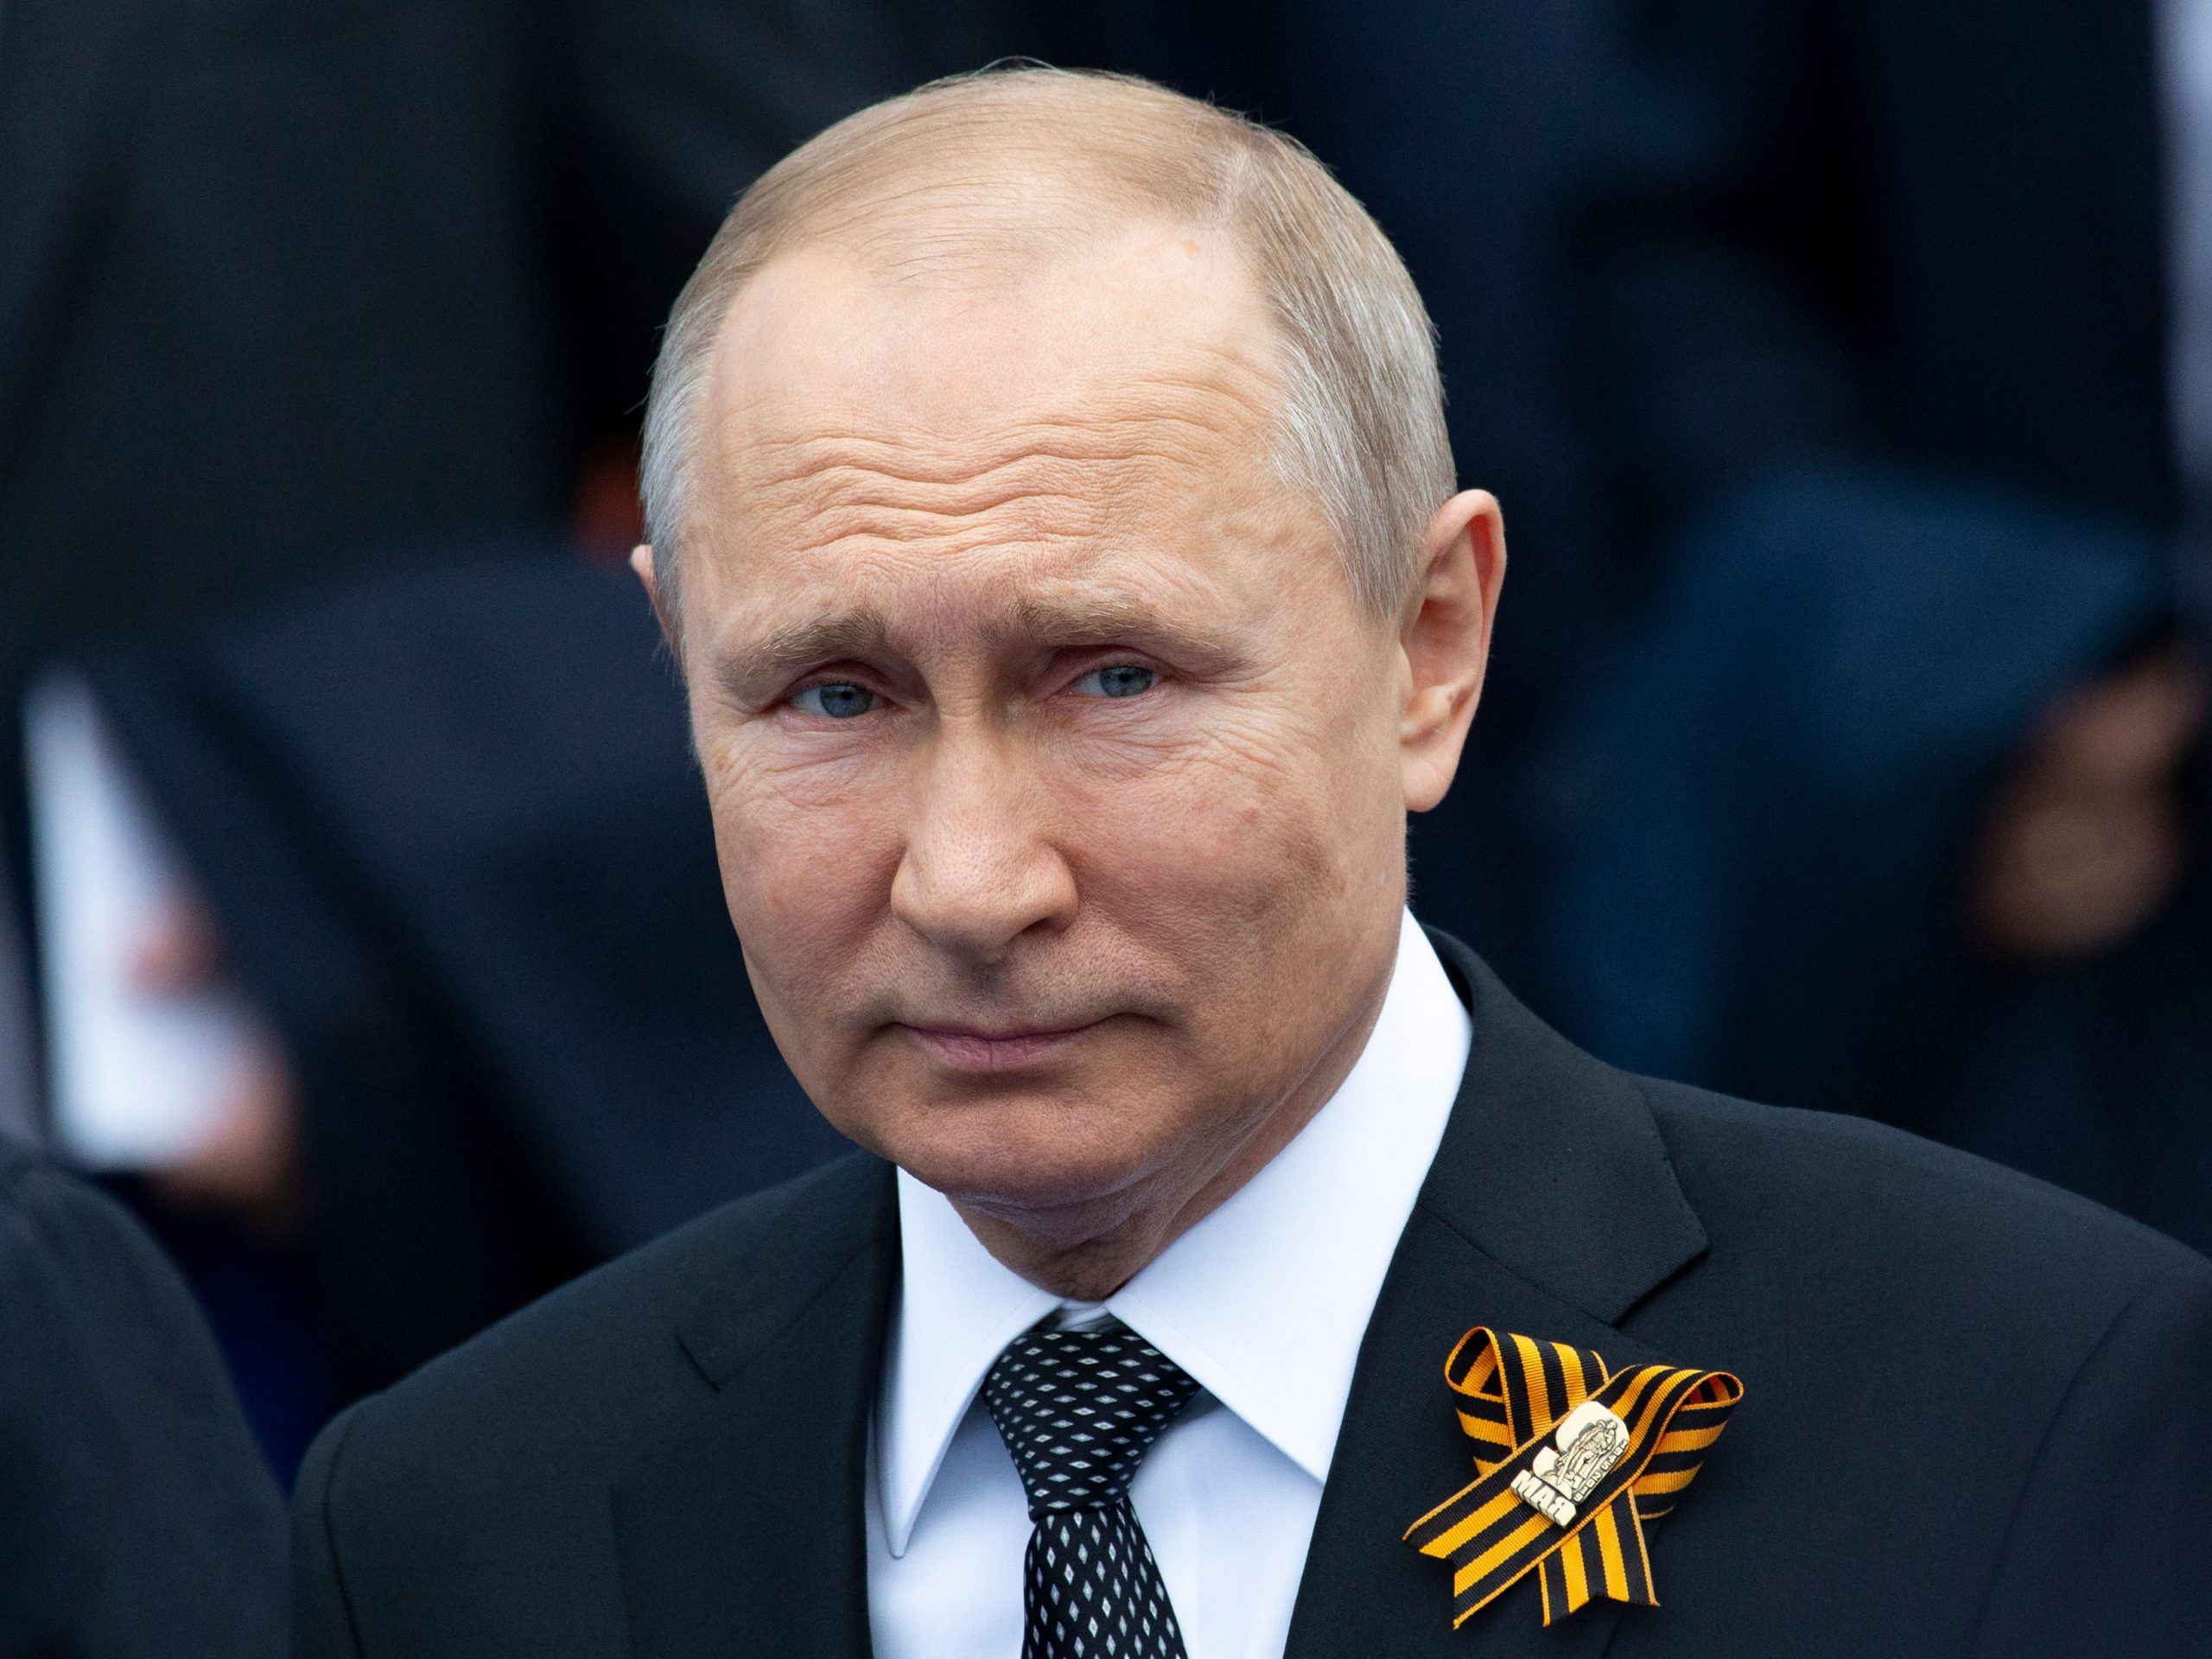 Russian President Vladimir Putin warns West over arms, says will hit new target in Ukraine